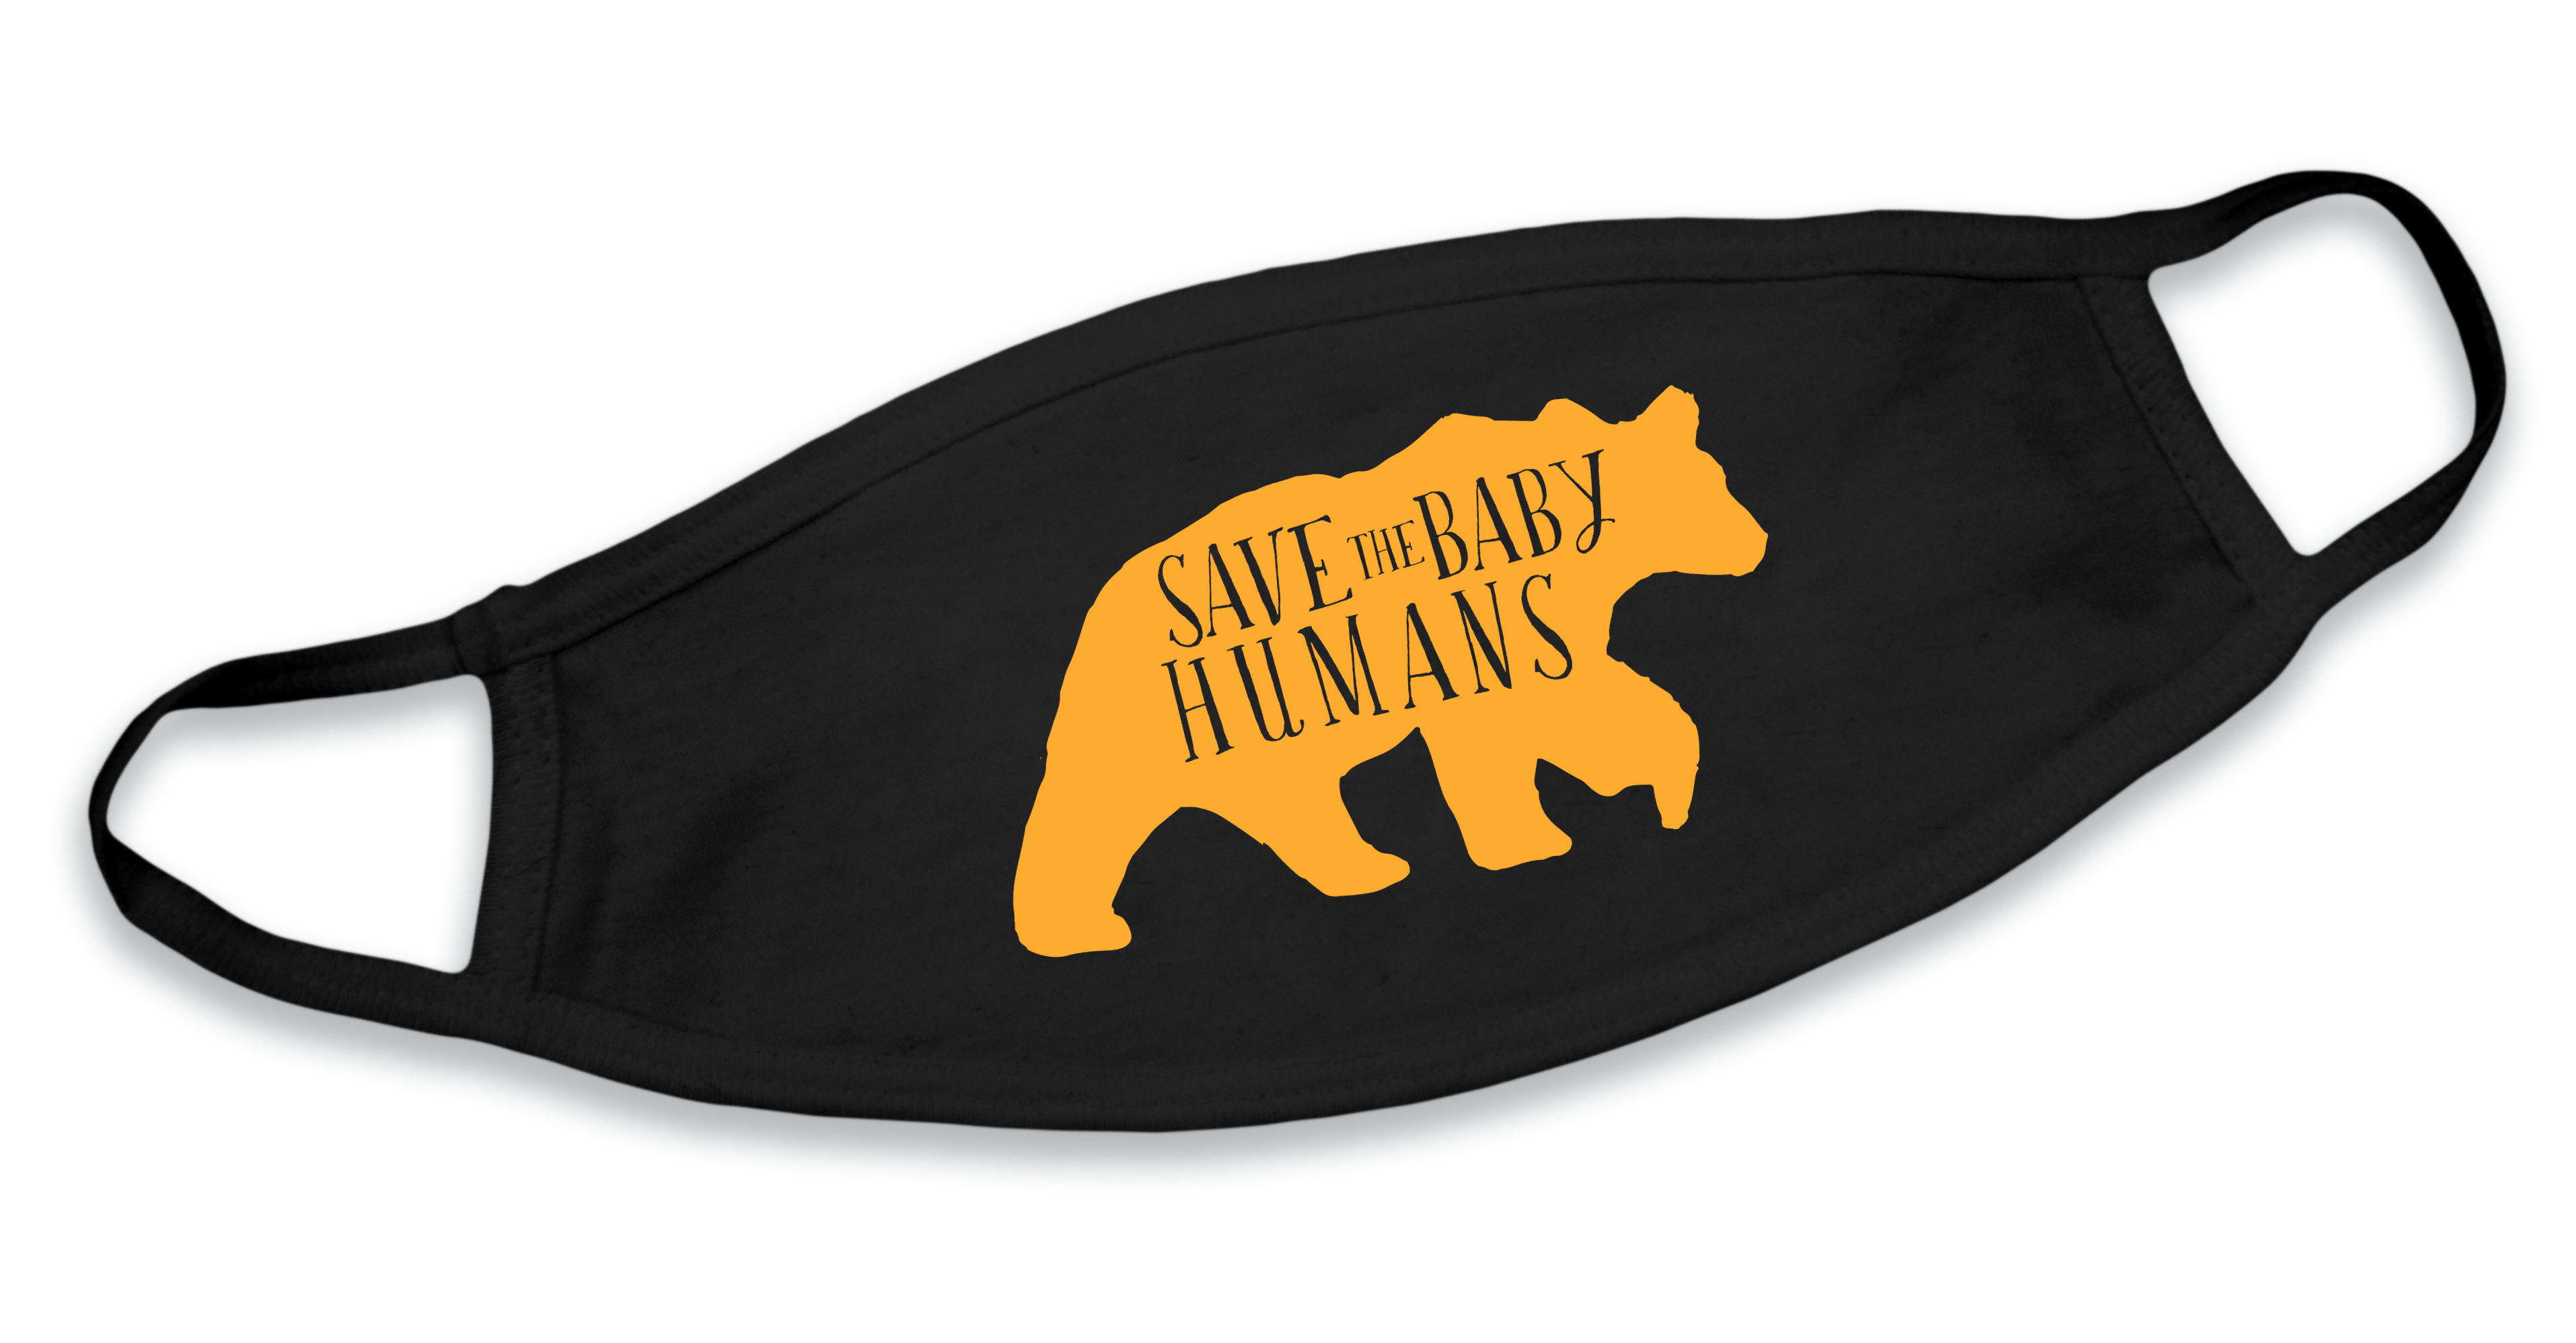 Save the baby Humans Bear Mask